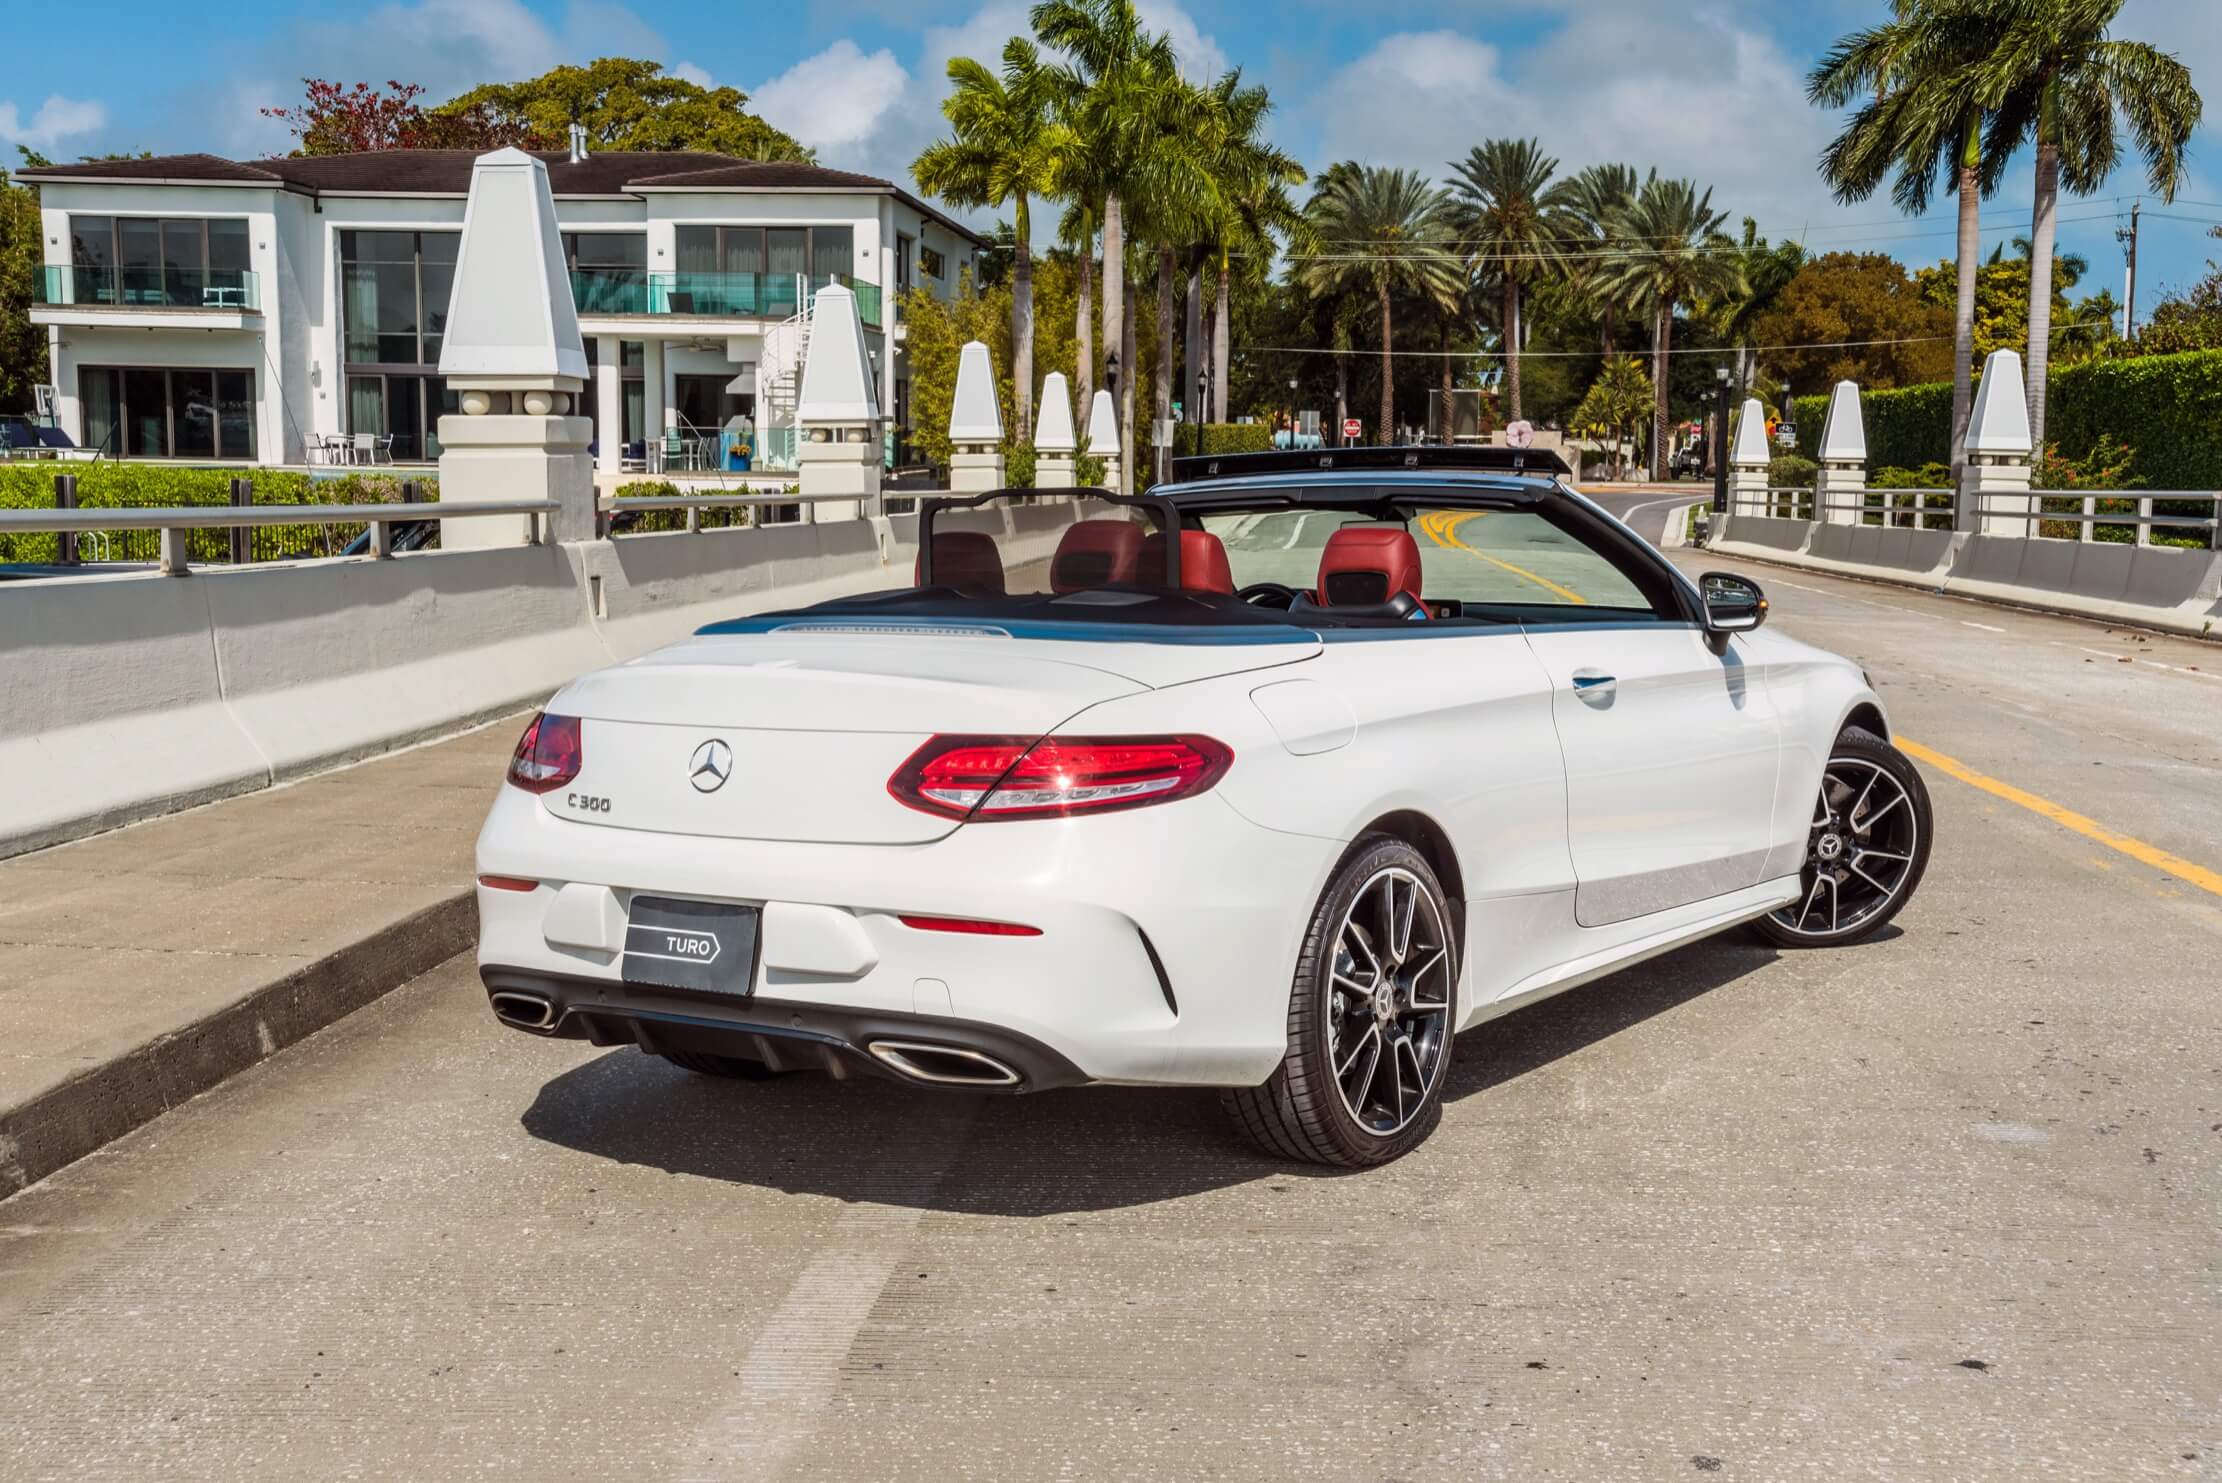 2019_MERCEDES BENZ_C300-CONVERTIBLE_WHITE-RED_73